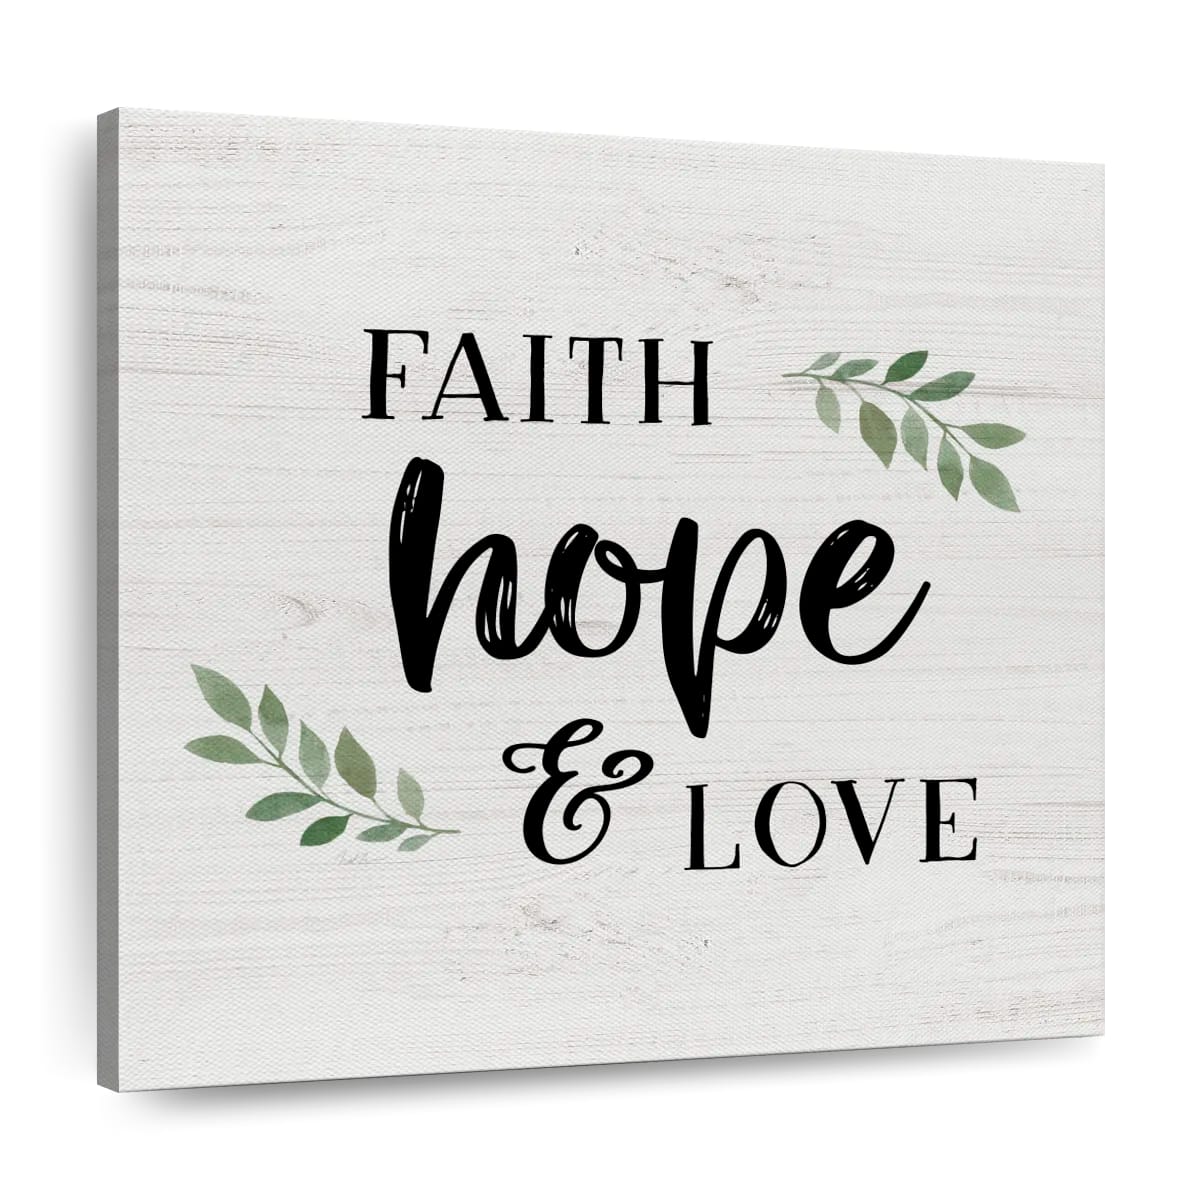 Hope And Love Square Canvas Wall Art - Christian Wall Decor - Christian Wall Hanging